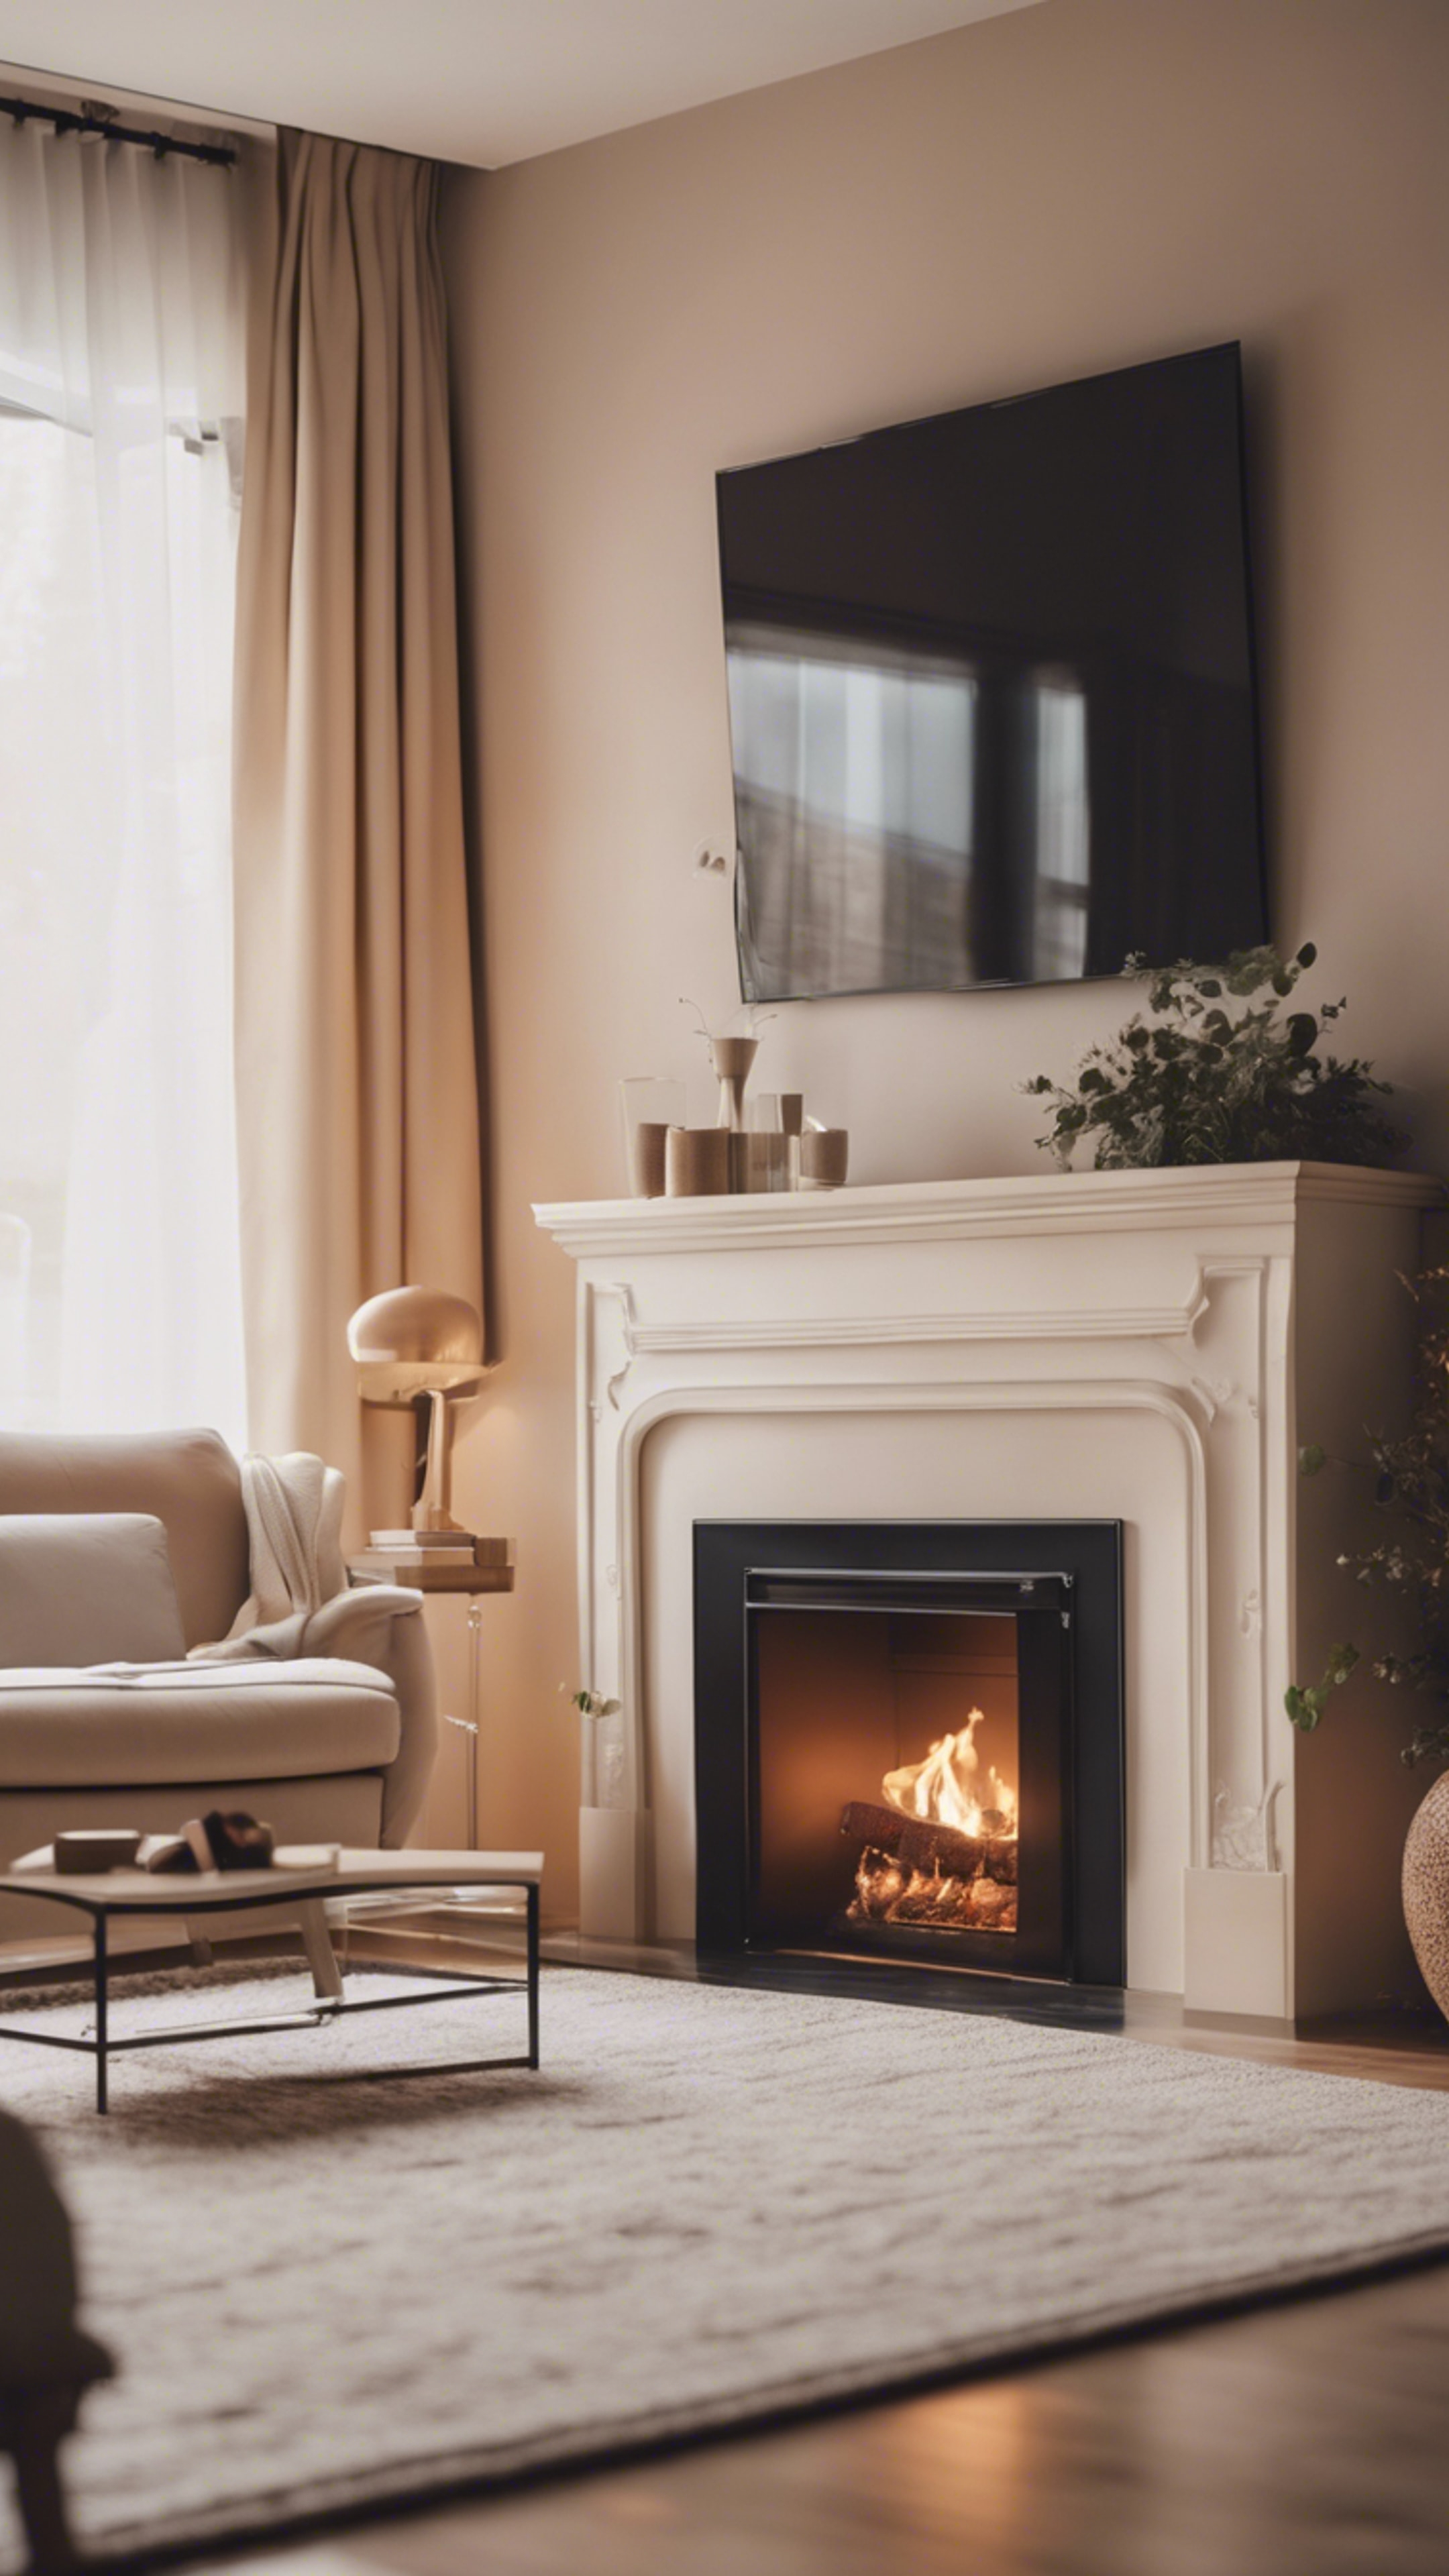 A cozy and tranquil cool beige living room with a fireplace alive with dancing flames. ផ្ទាំង​រូបភាព[fdd7e3460c134e479b57]